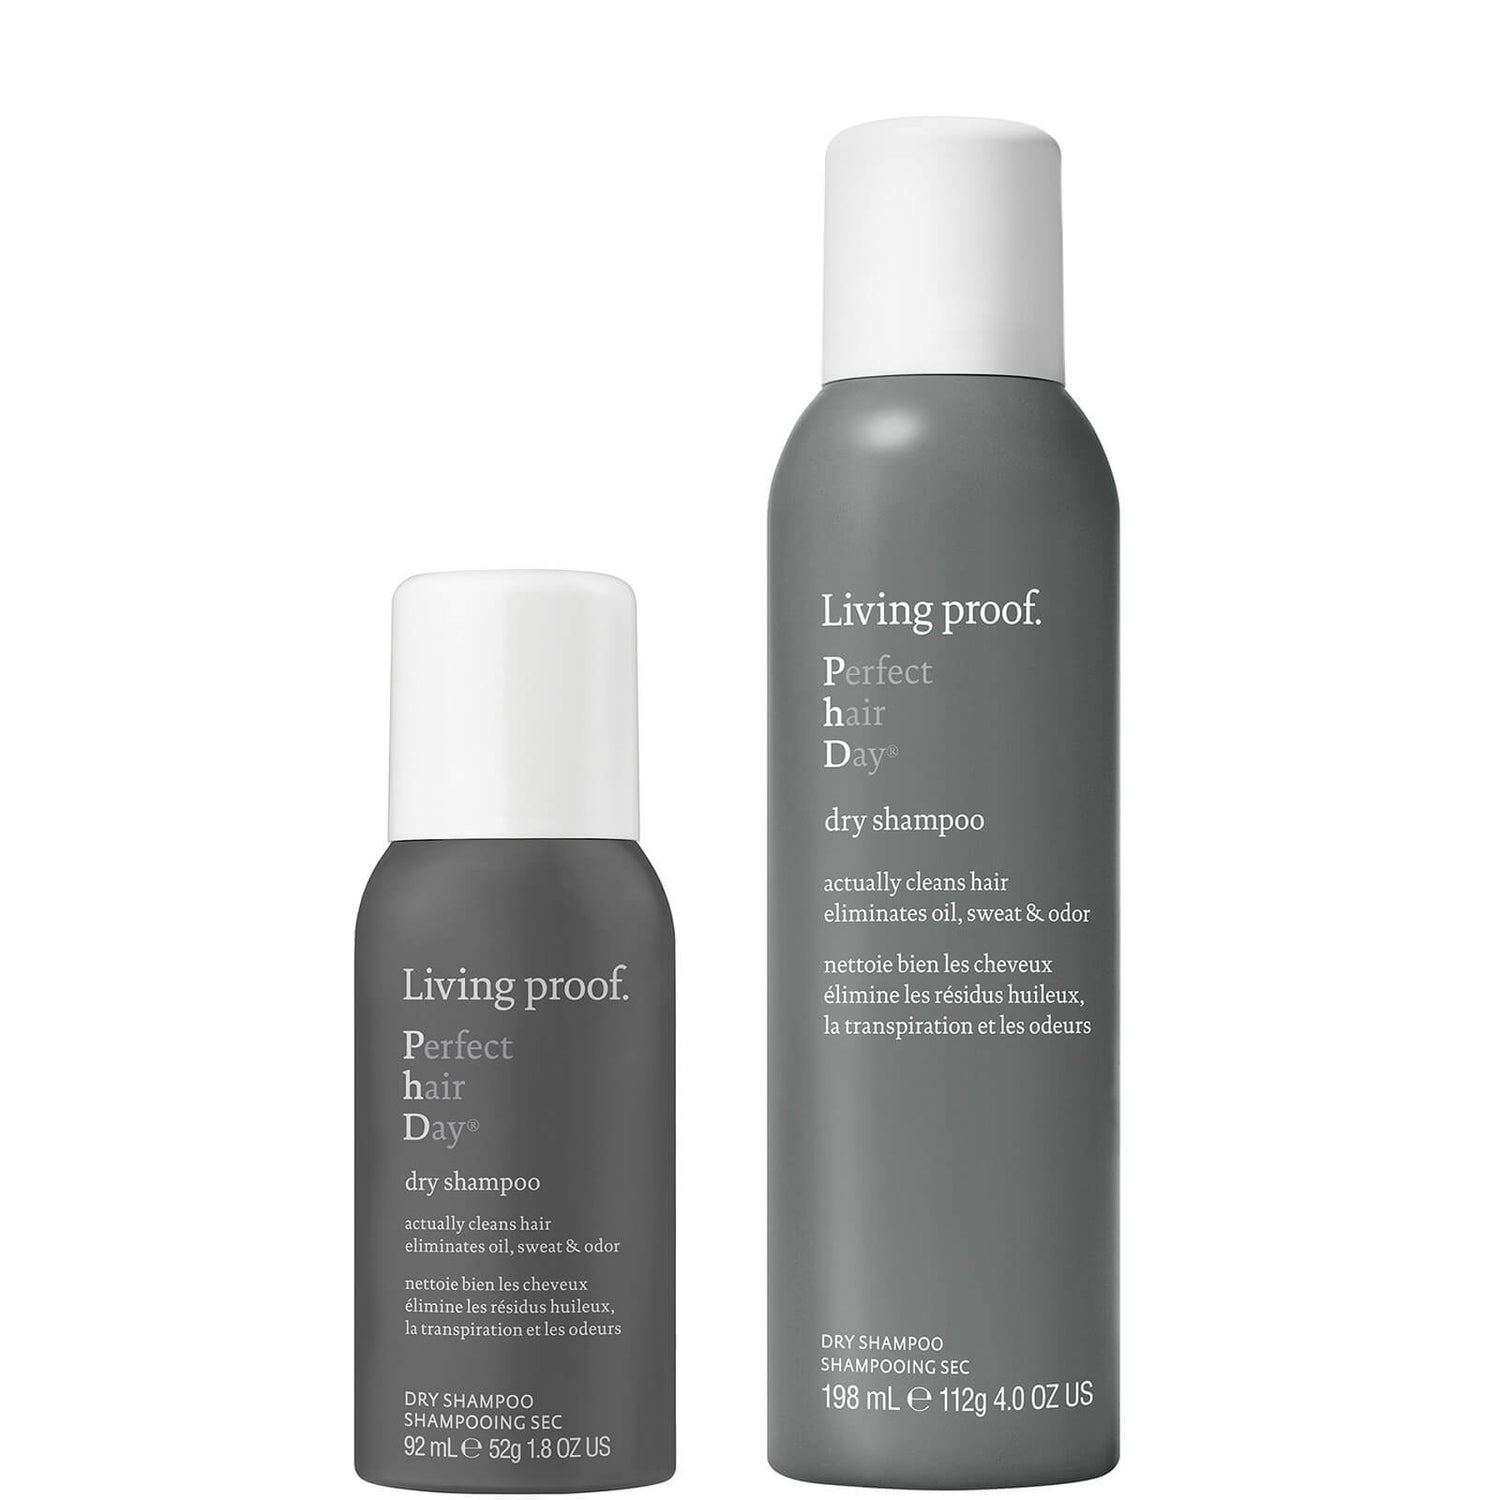 Living Proof Perfect Hair Day (PhD) Dry Shampoo Gift Set (Worth £28.00)